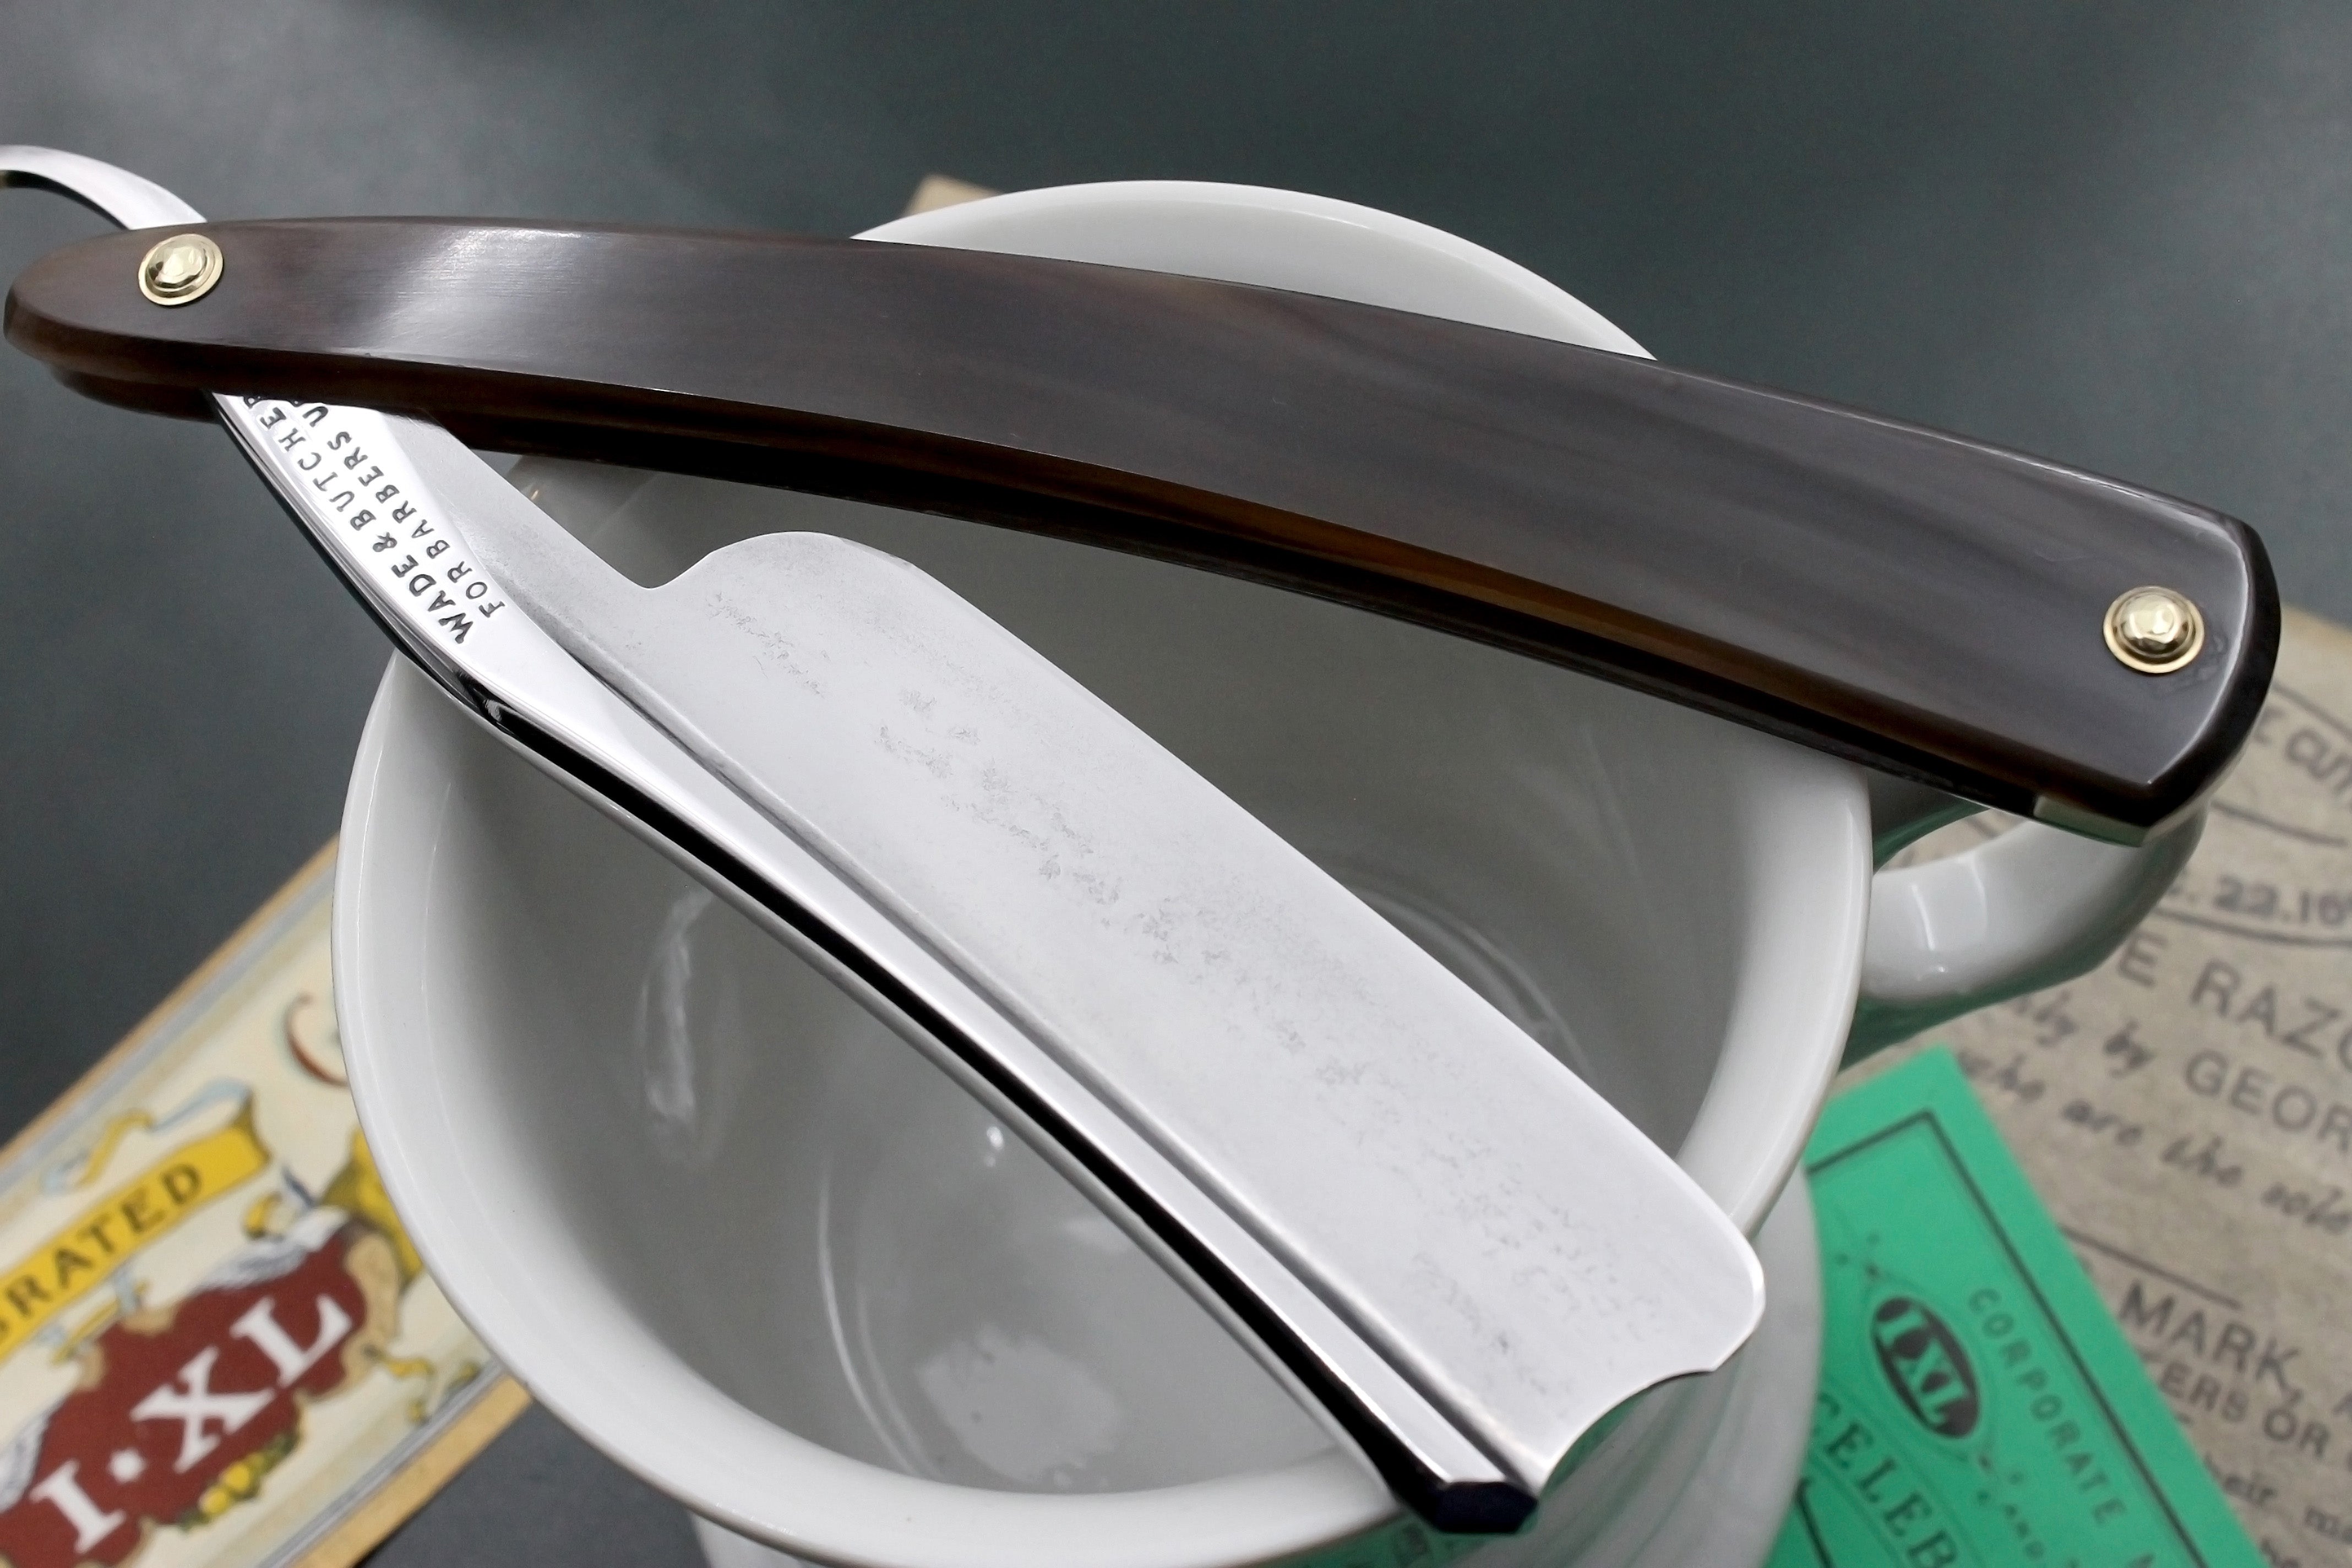 Wade & Butcher "For Barbers Use" 15/16 - Uncommon Rattler Fully Restored Custom Scales Straight Razor - Shave Ready